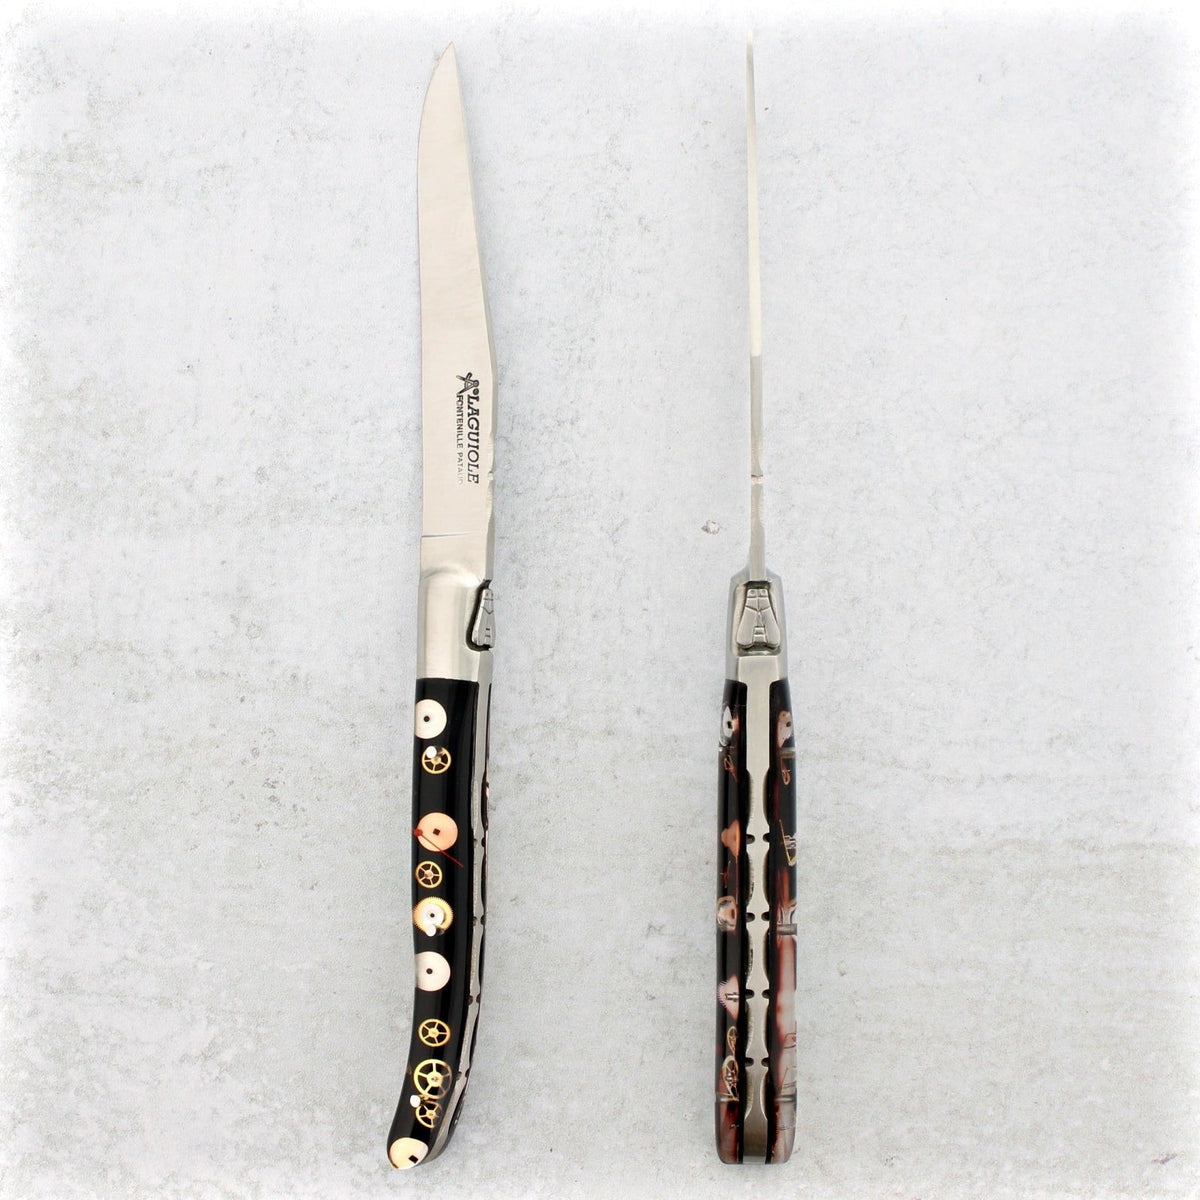 Laguiole Forged Steak Knives Genuine Timepiece Gears Inlay